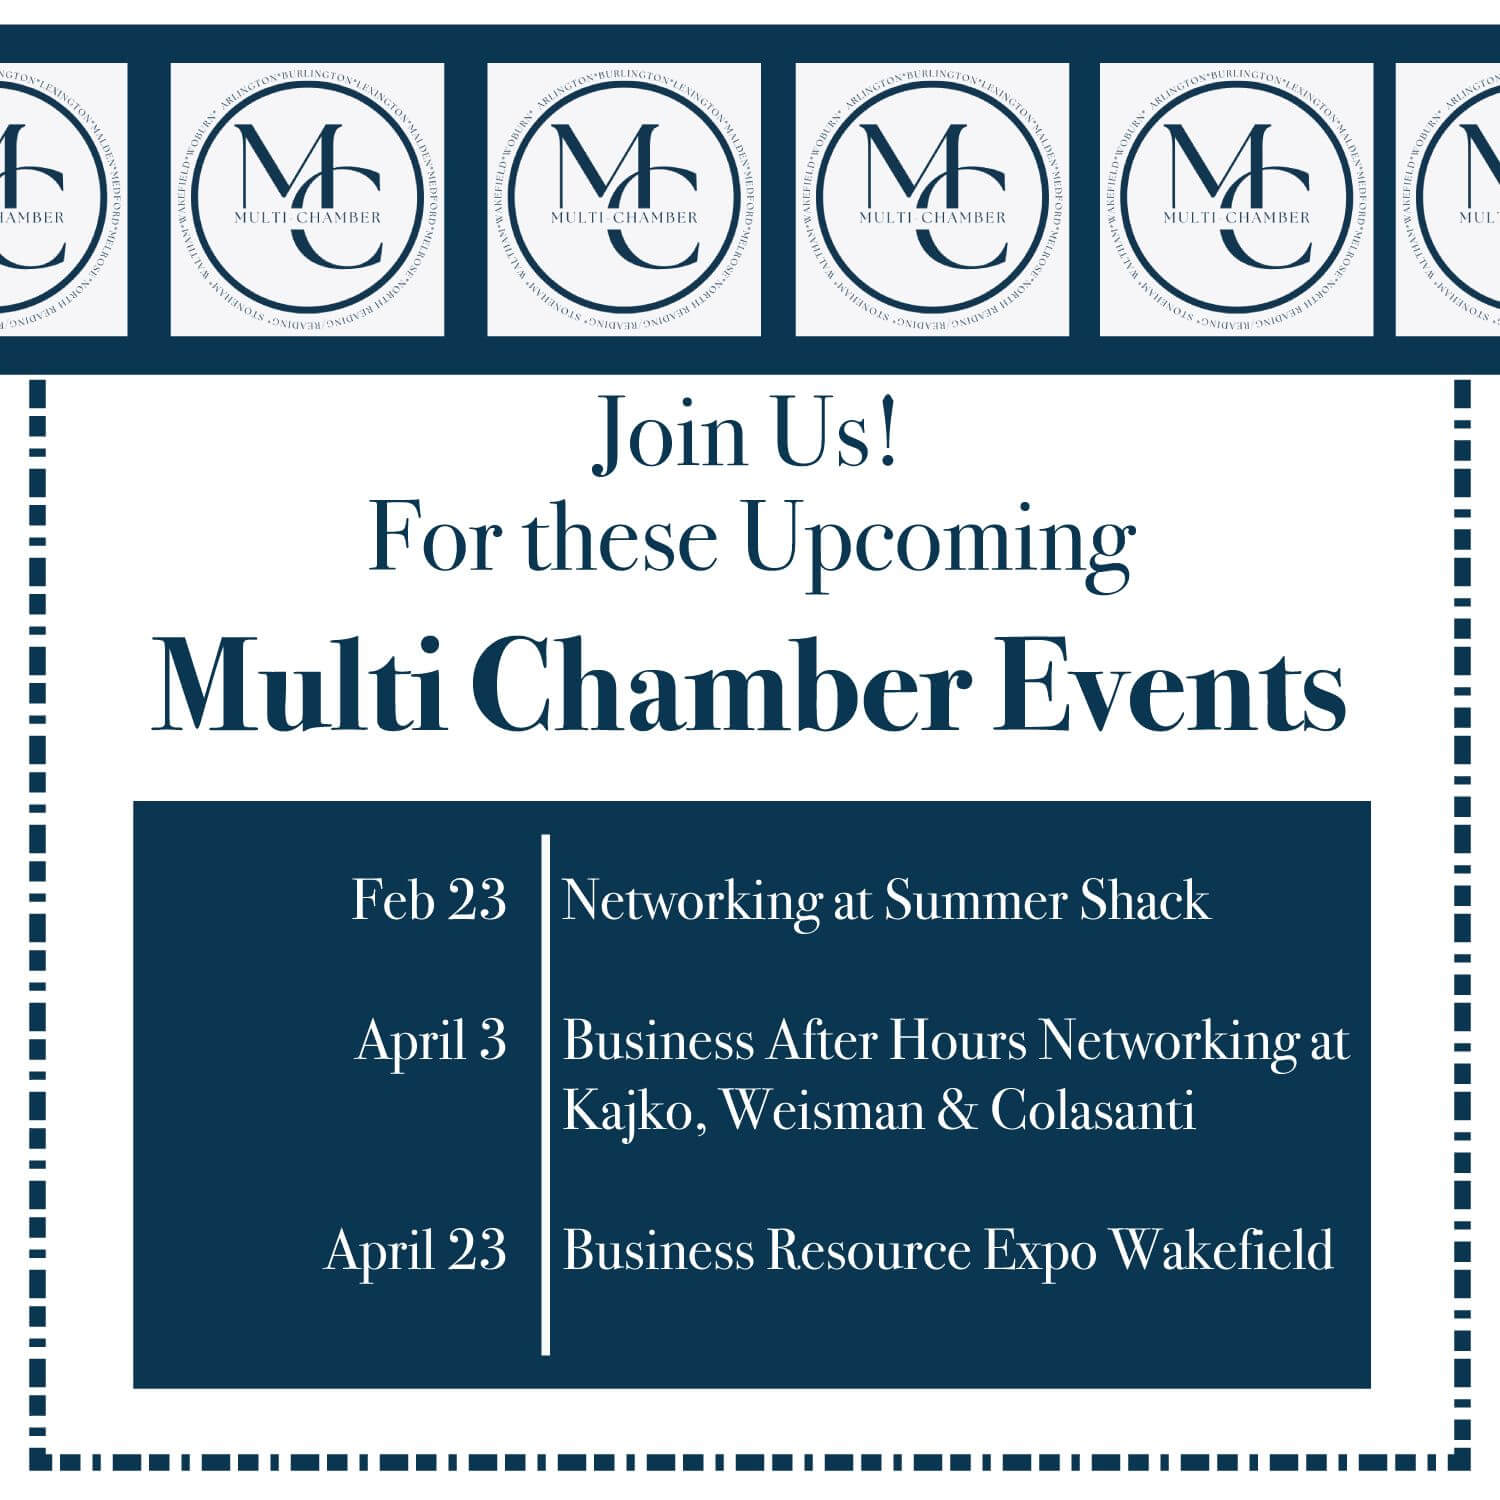 Multi Chamber Events Dates